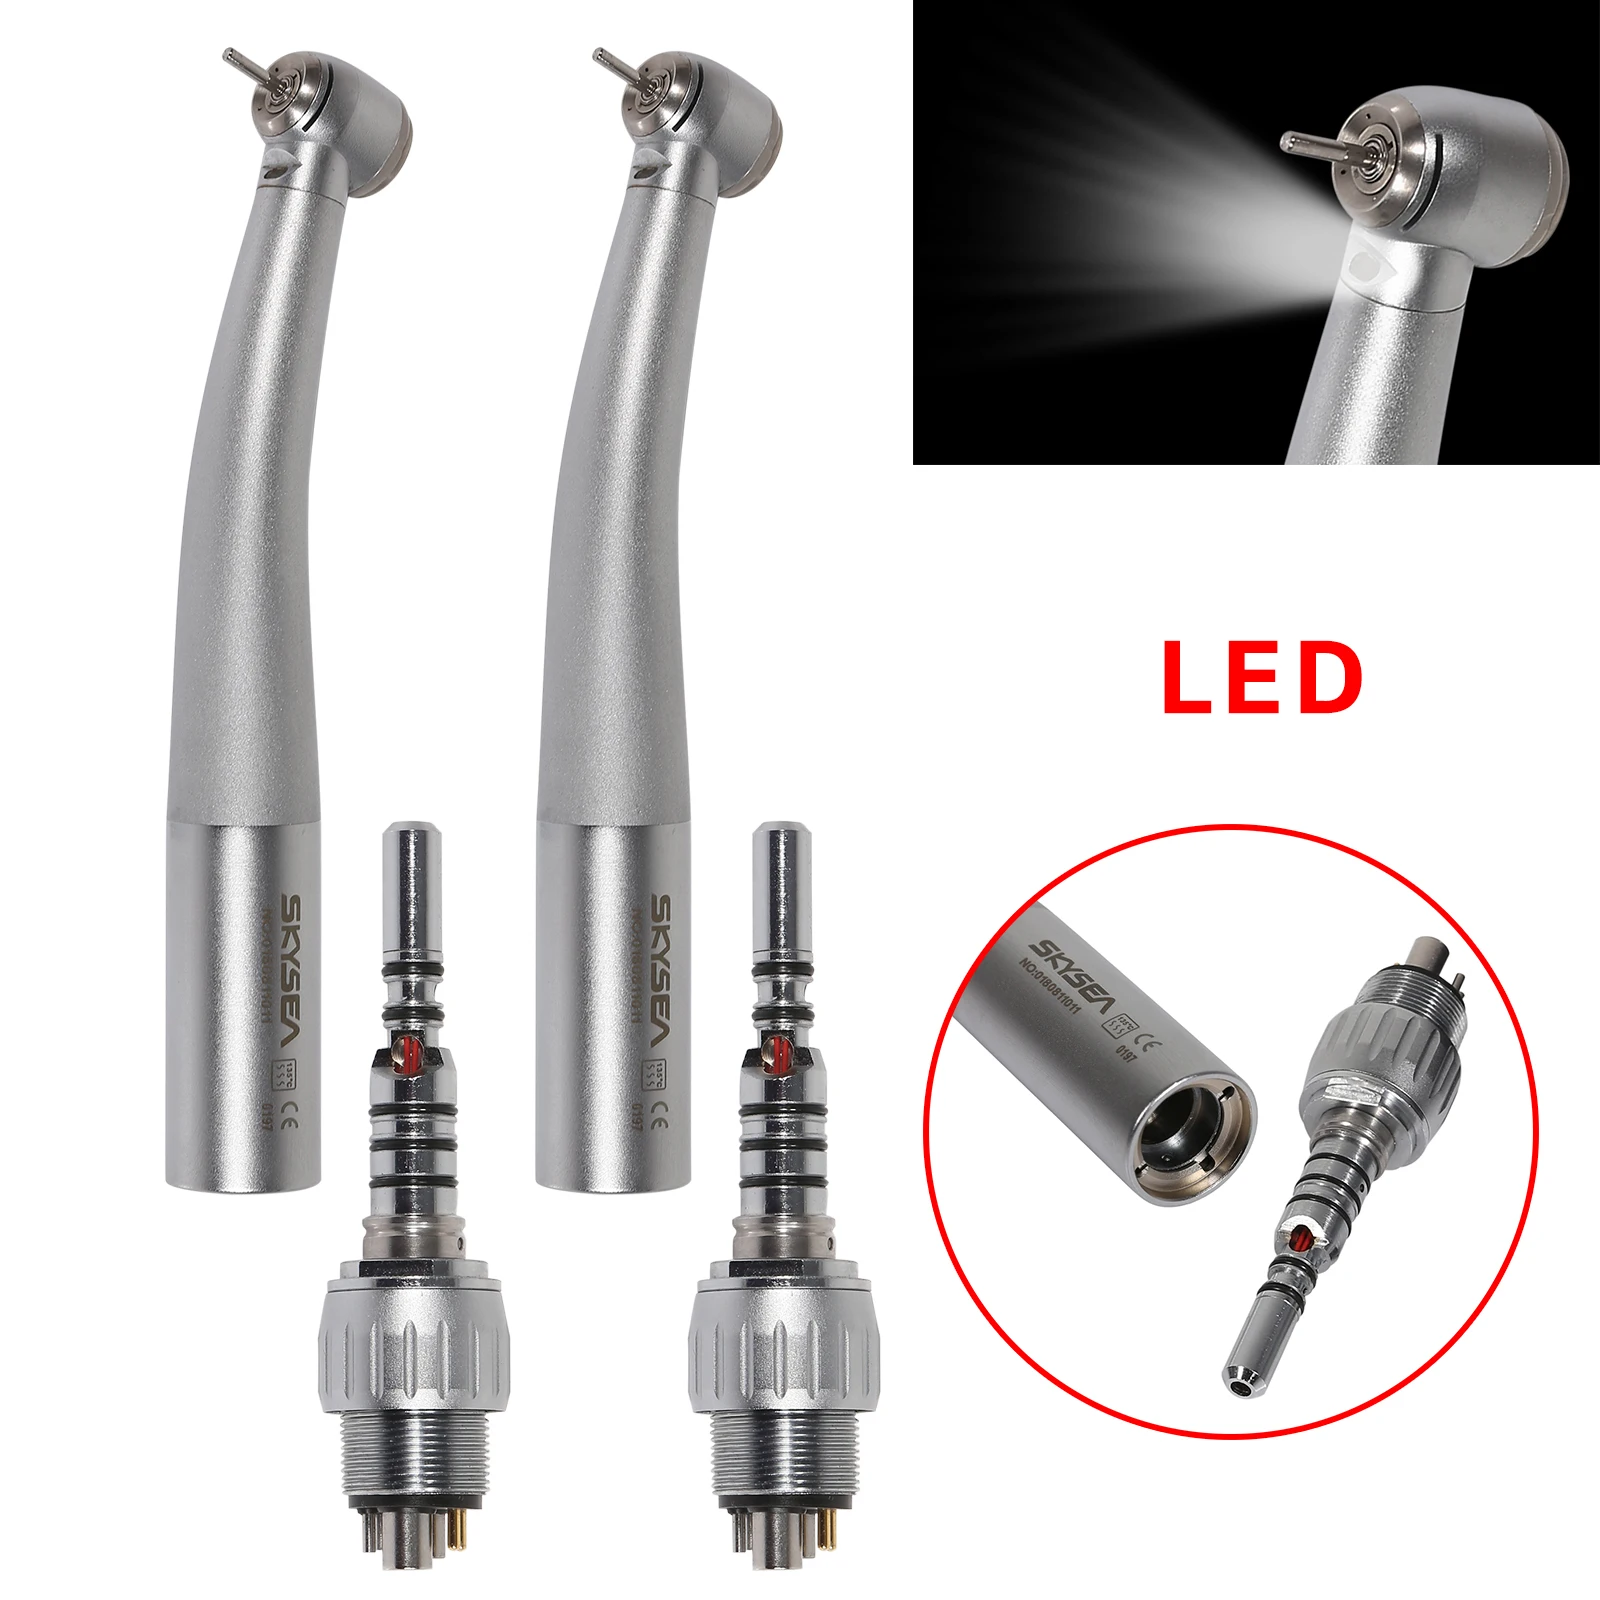 

KaVo Style Dental Fiber optic Handpiece 4 Water Spray Large Head Fit 4/6 Hole Quick Coupler Rotor Ceramic Bearing material